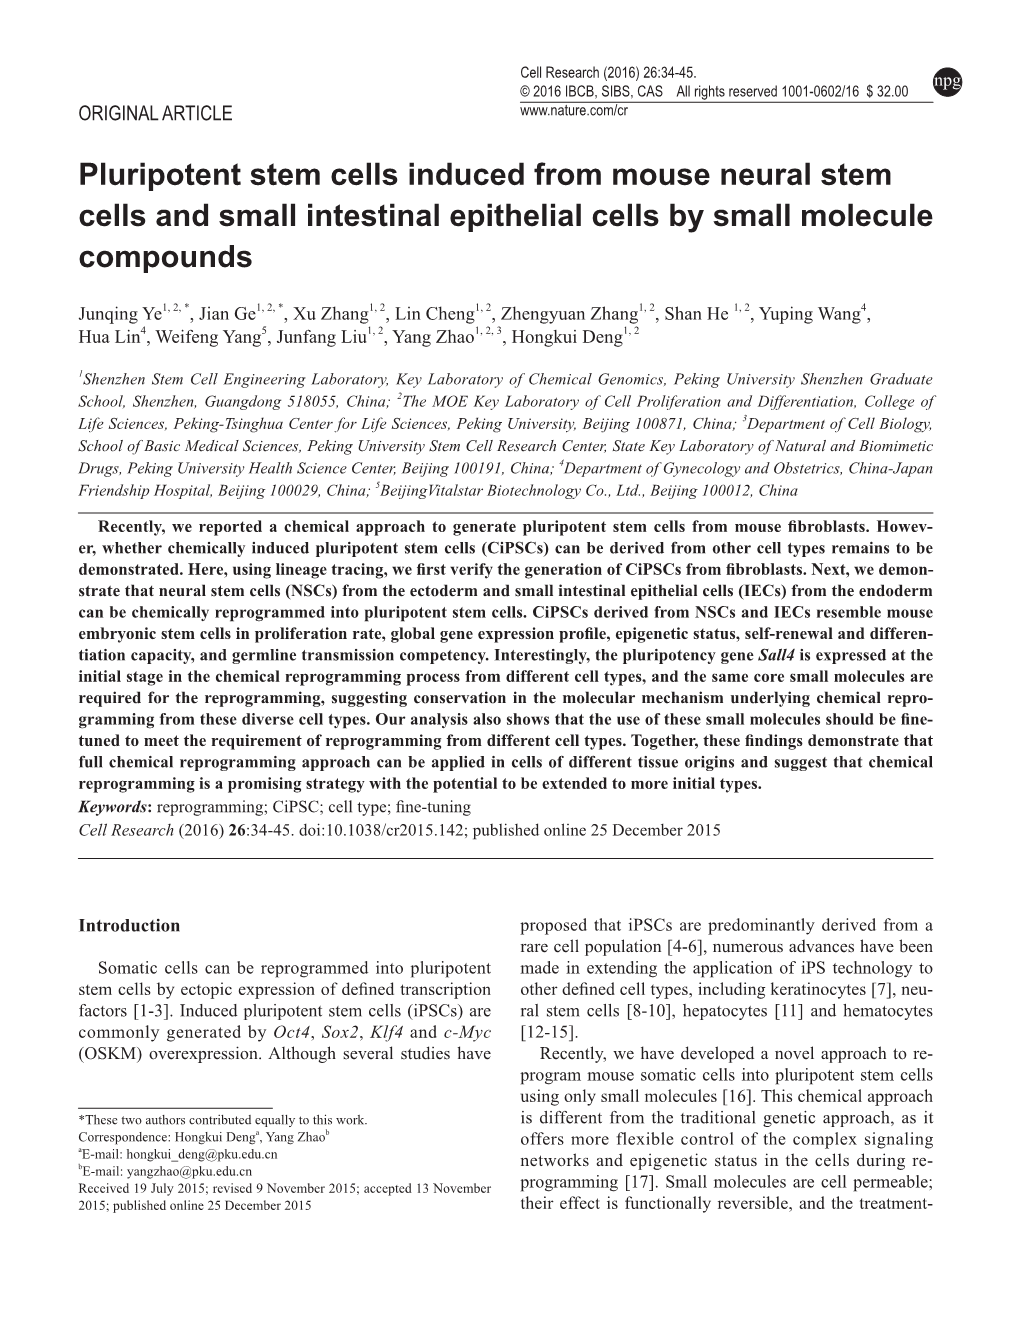 Pluripotent Stem Cells Induced from Mouse Neural Stem Cells and Small Intestinal Epithelial Cells by Small Molecule Compounds